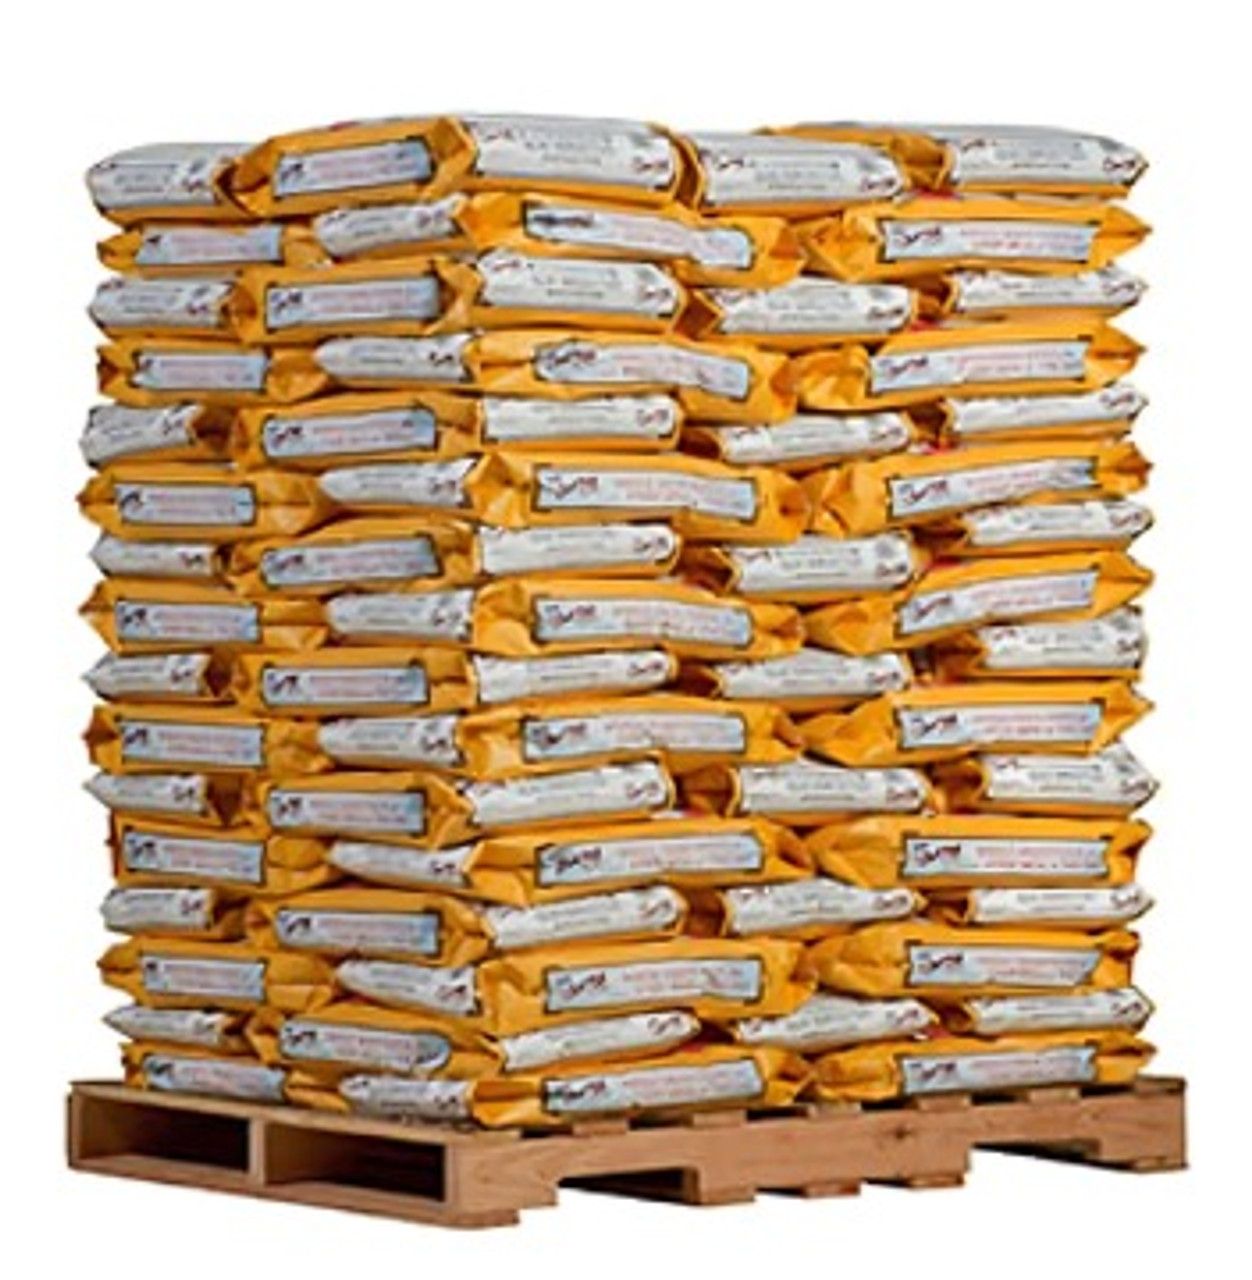 Bob's Red Mill 25 lb. (11.34 kg) Organic Gluten-Free Whole Grain Rolled Oats (60 BAGS/PALLET) - Chicken Pieces